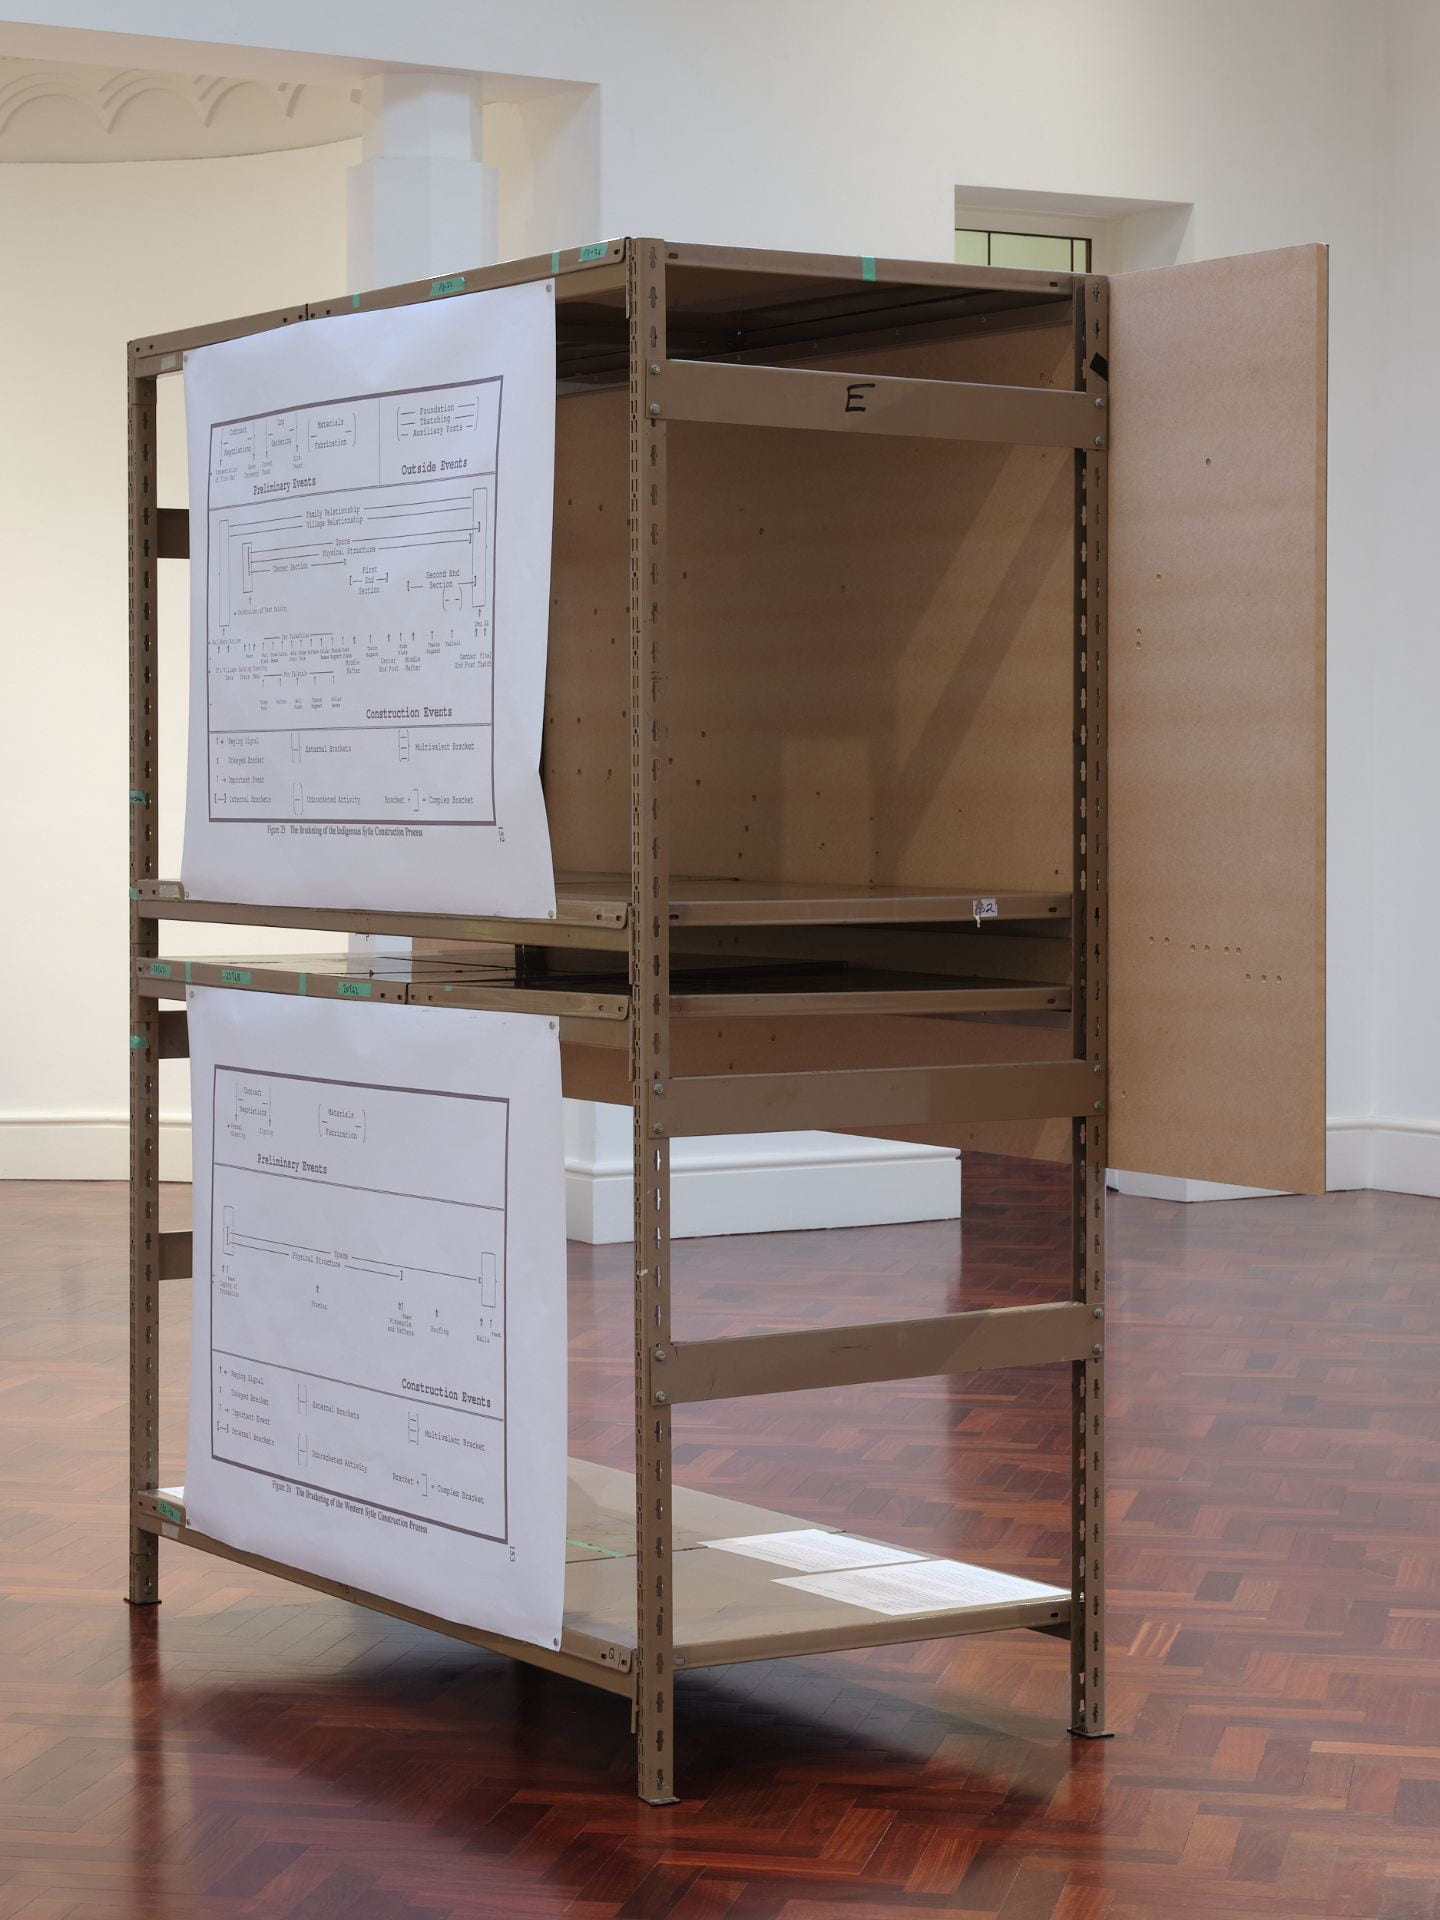 Two large white diagrams attached to the back of a metal shelving unit, in a large gallery space.